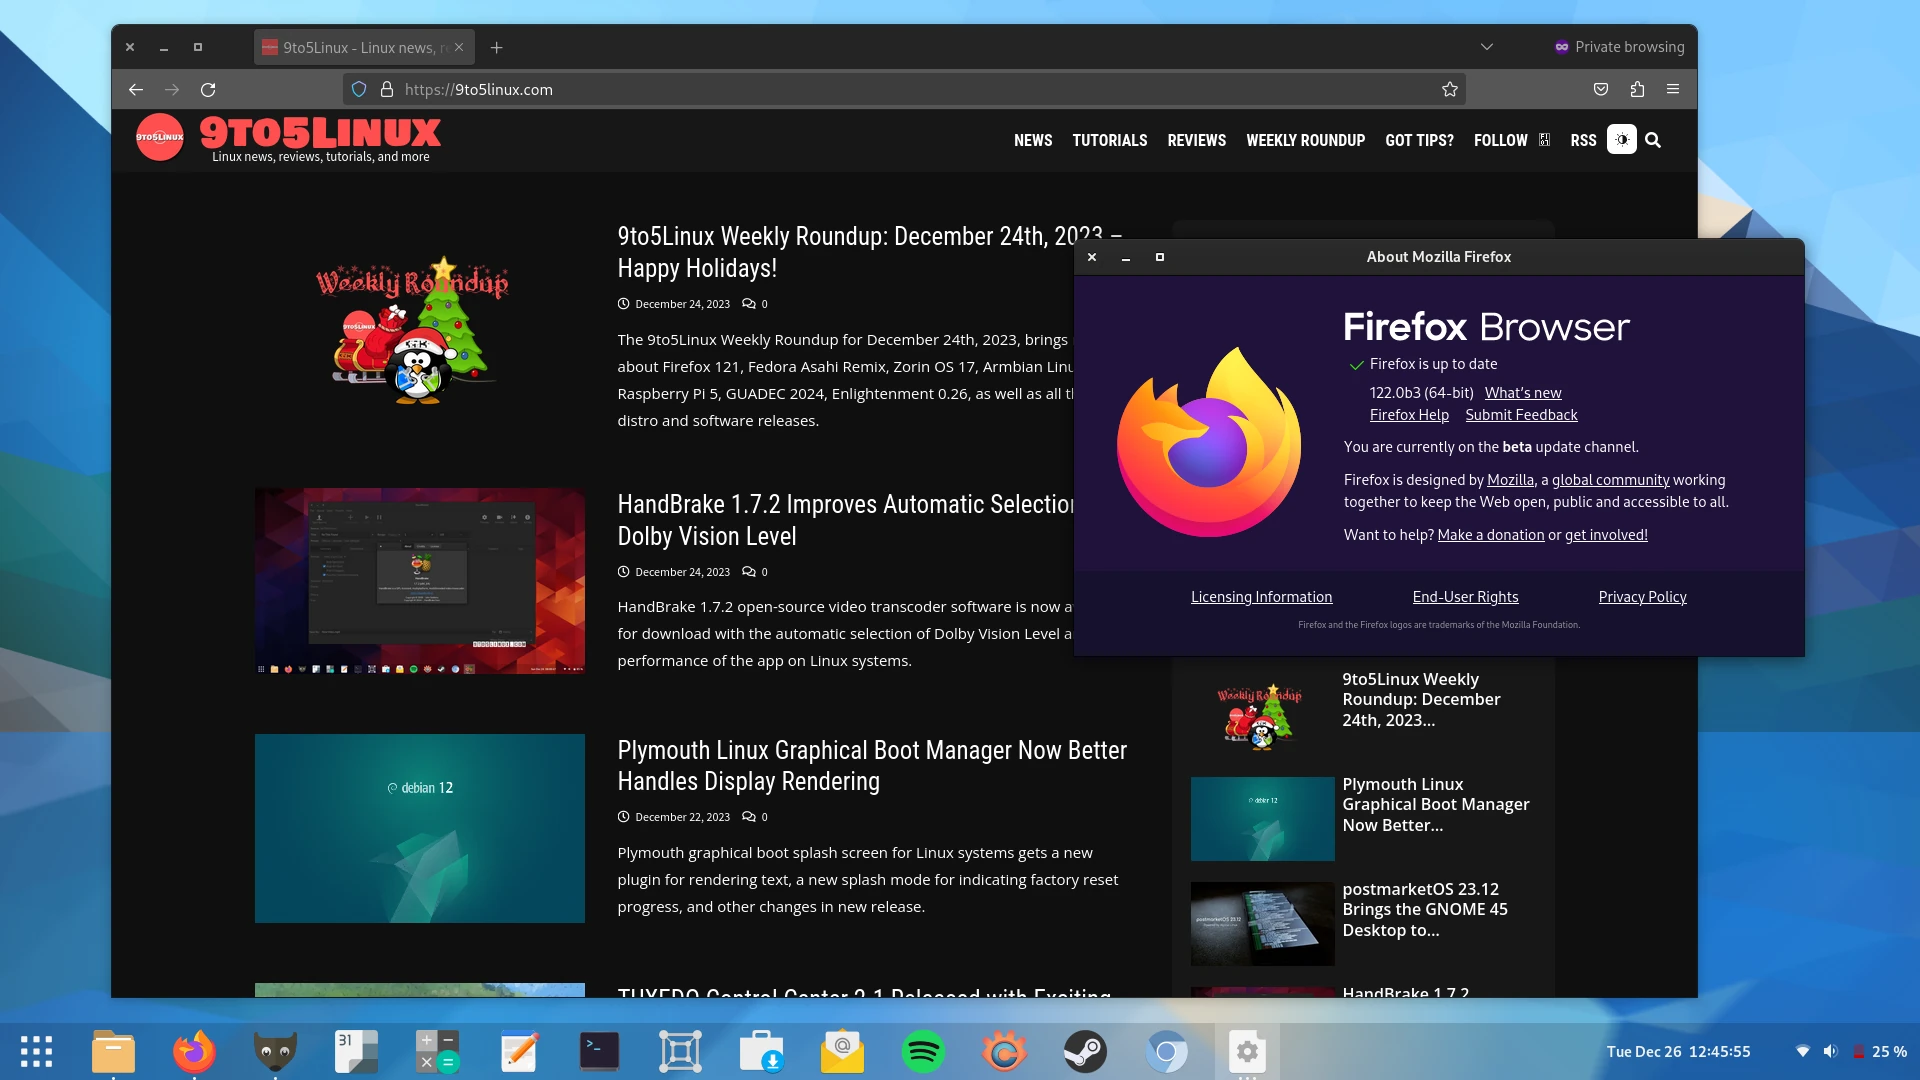 Firefox 122 Enters Public Beta Testing with Improved Built-In Translation Feature